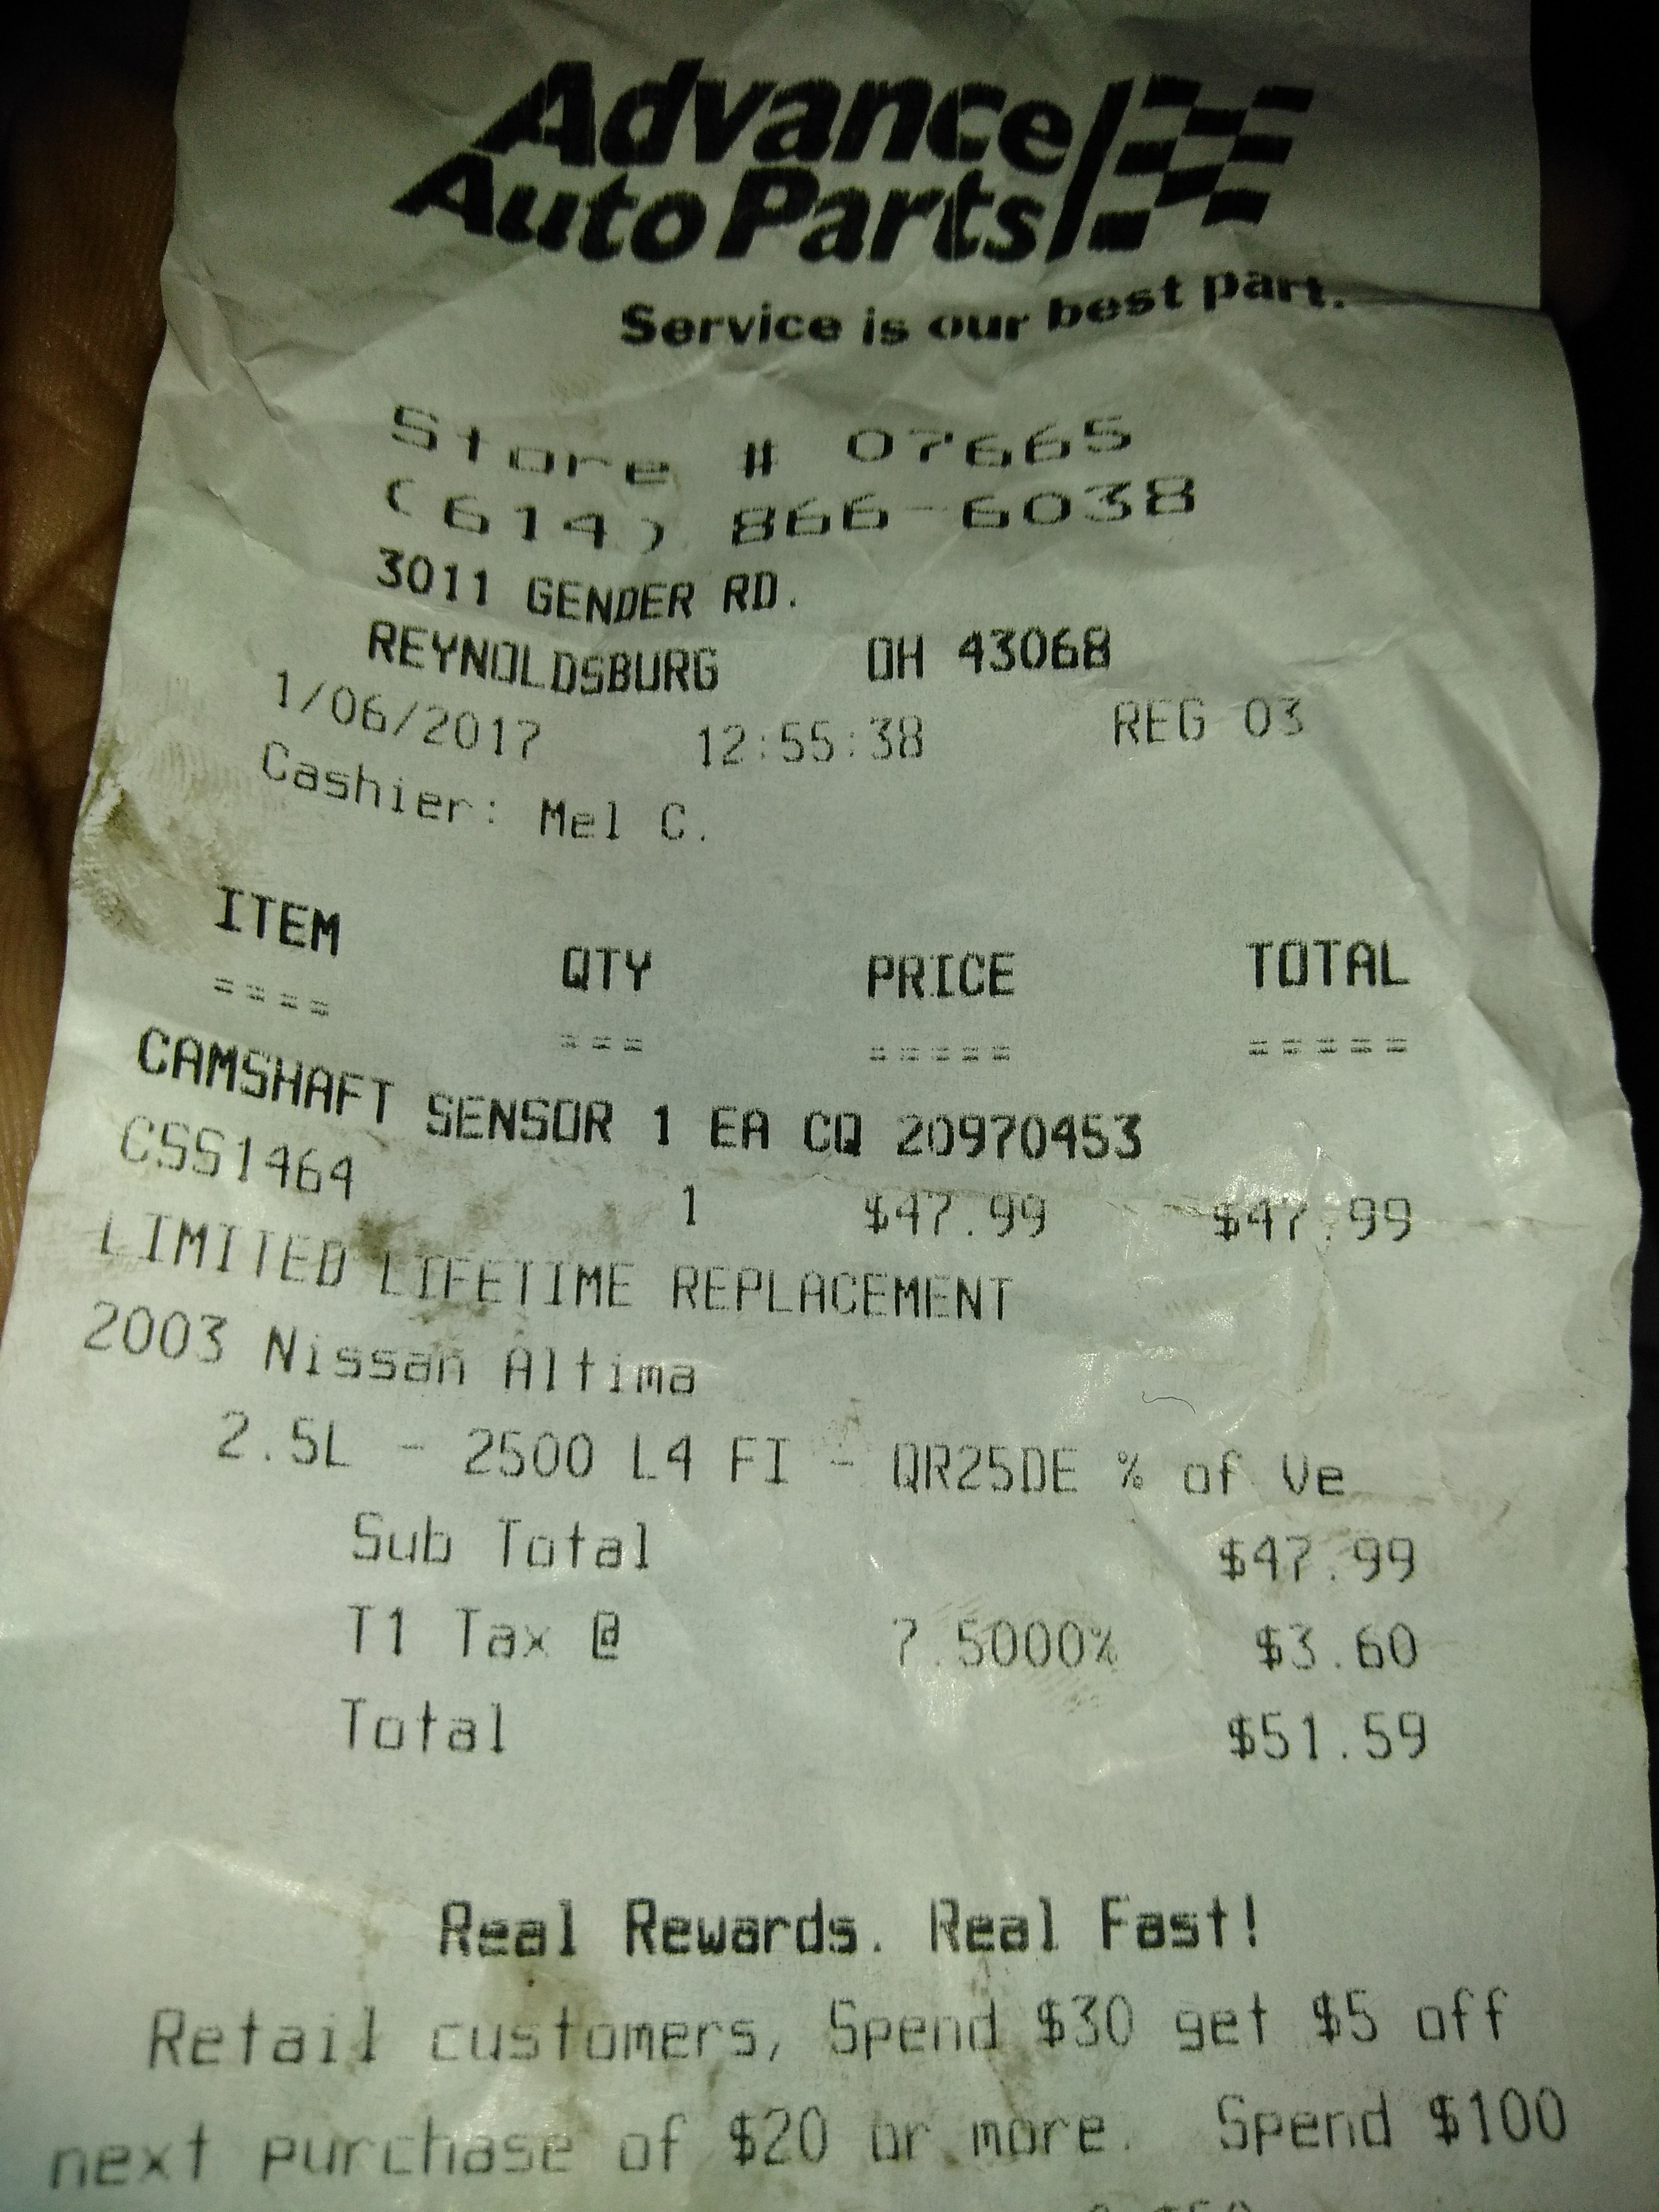 The receipt for the crankshaft position sensor I bought. I also have the card for the store and contact information.